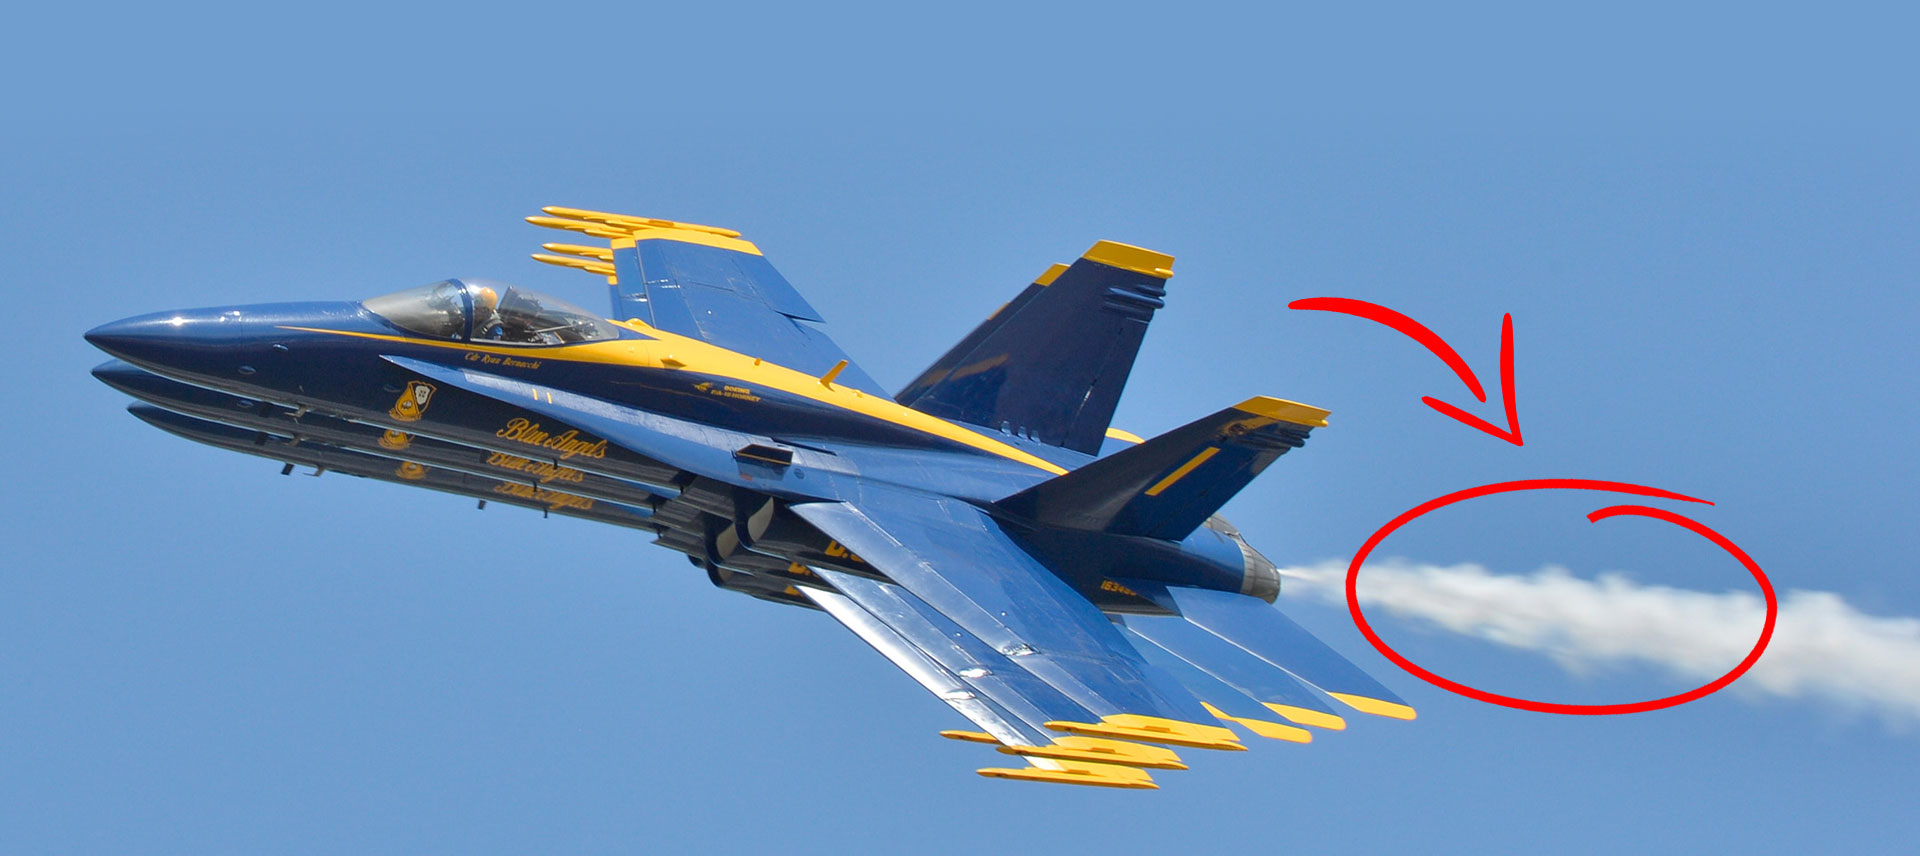 7 Fun Facts About The Blue Angels - Pearl Harbor Aviation Museum